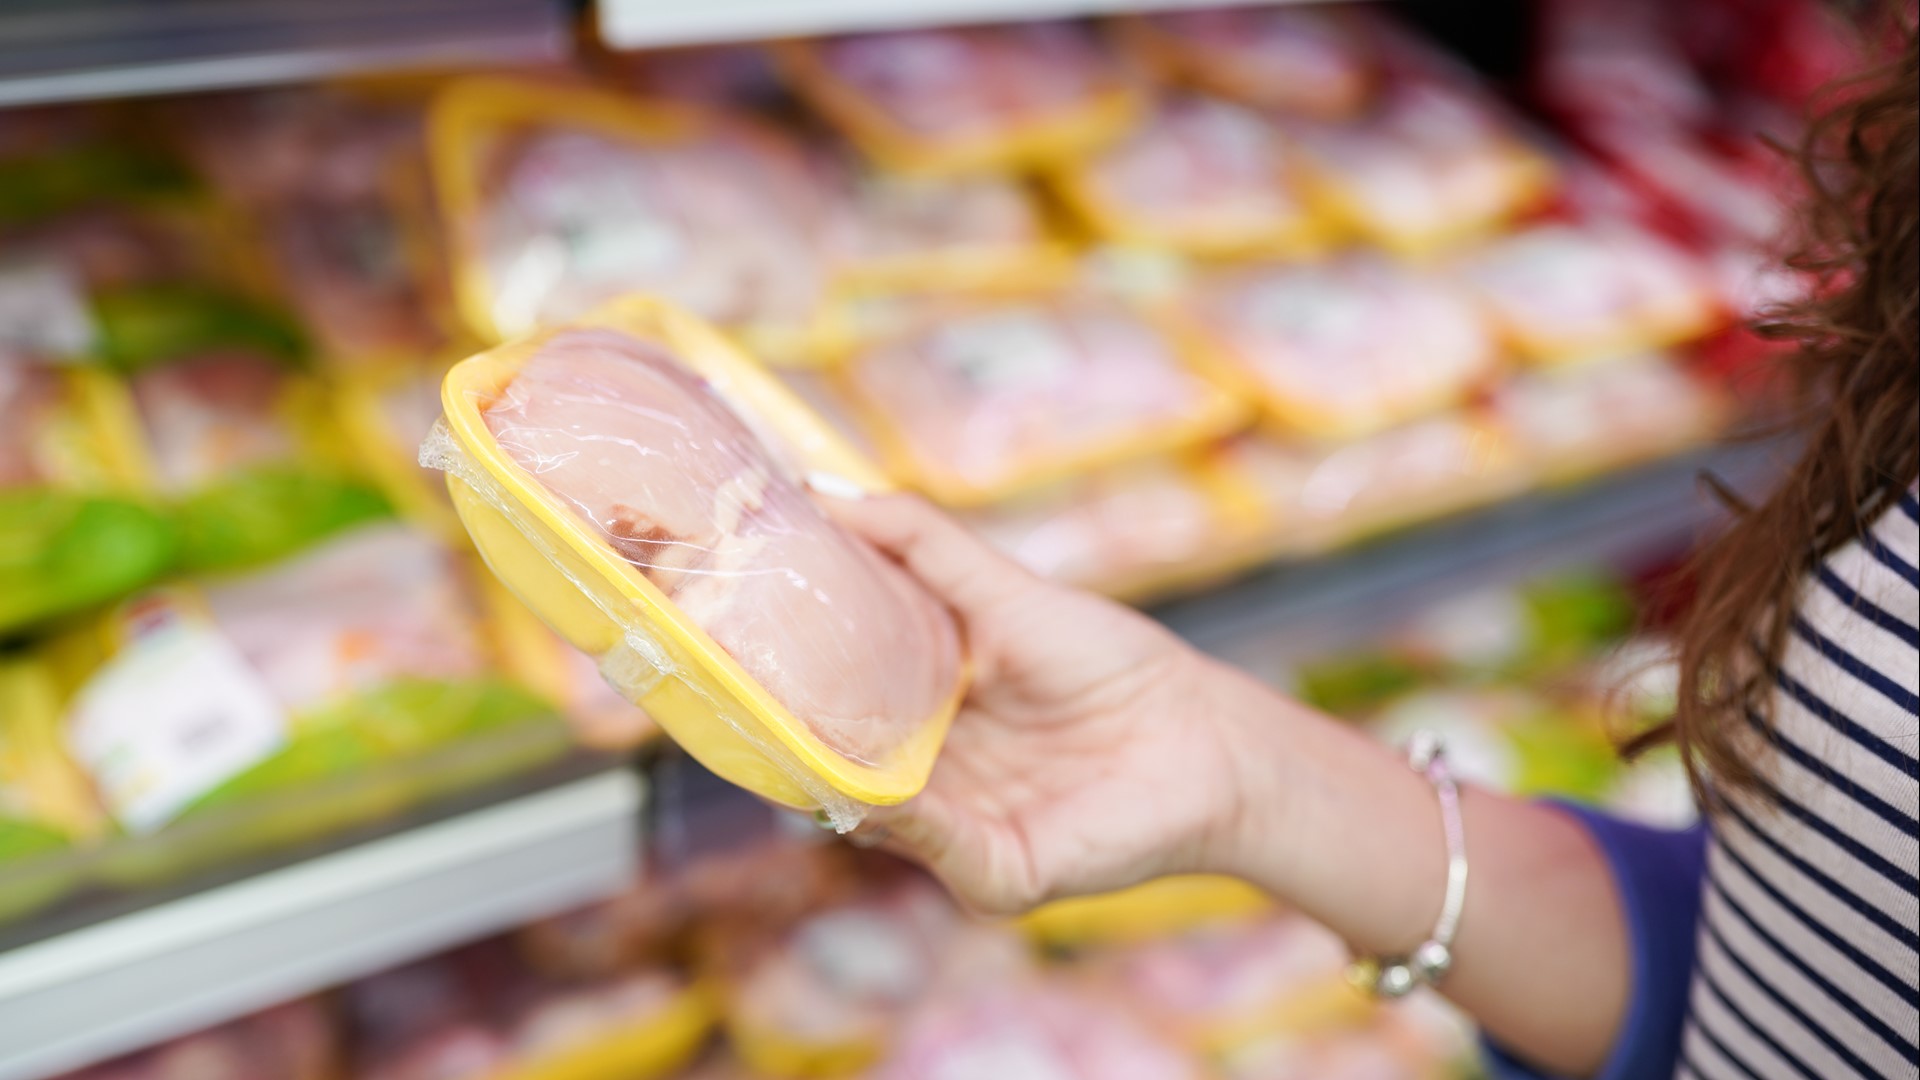 An email claims you could get money from a court settlement if you were overcharged for chicken.